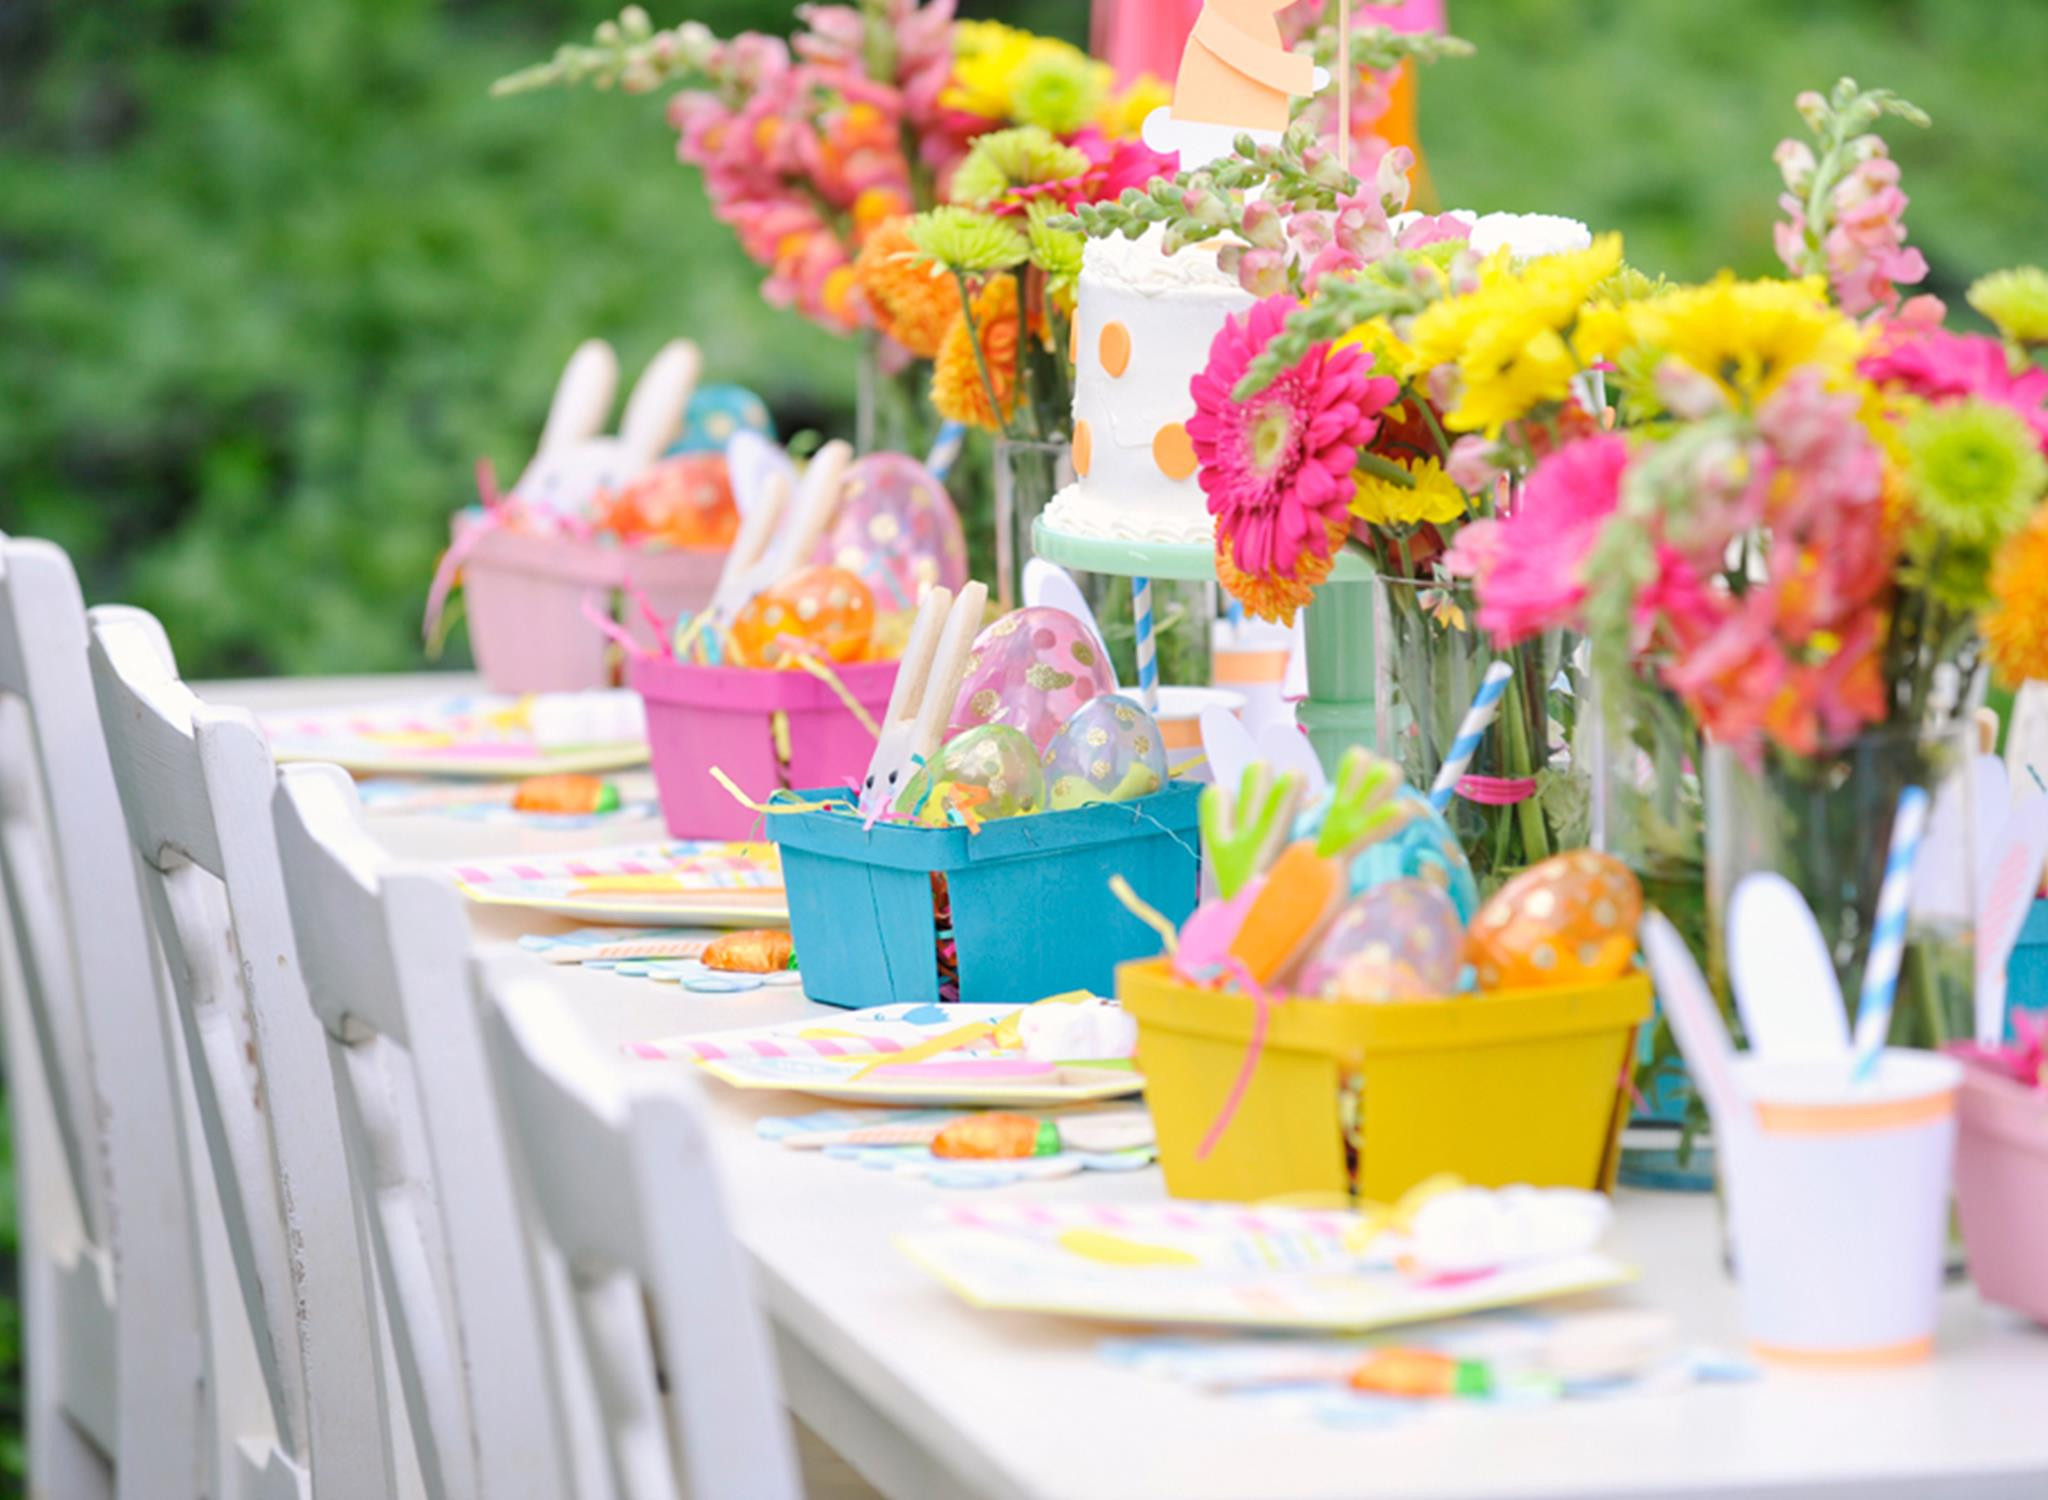 Easter Entertaining &amp; Party Ideas
 30 CREATIVE EASTER PARTY IDEAS Godfather Style